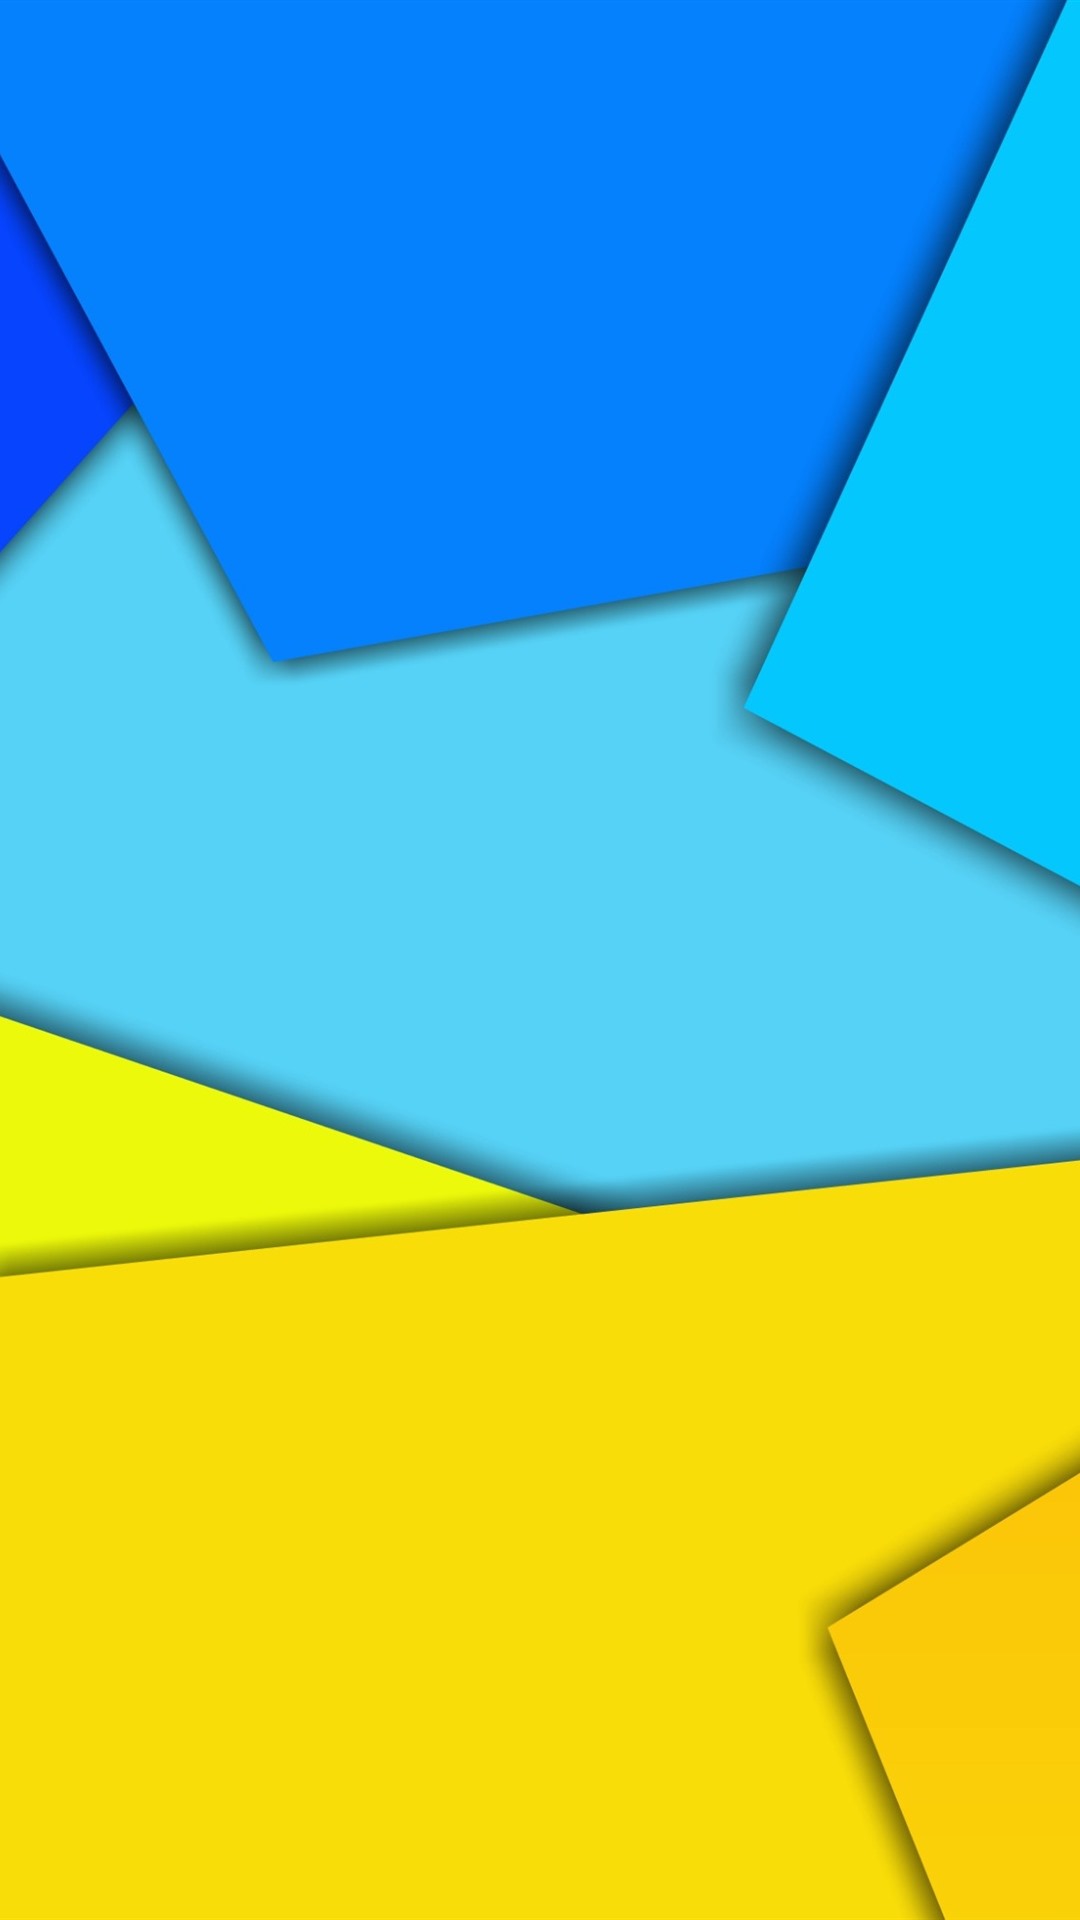 Iphone Wallpaper Yellow And Blue Geometric Figure, - Blue And Yellow Iphone  - 1080x1920 Wallpaper 